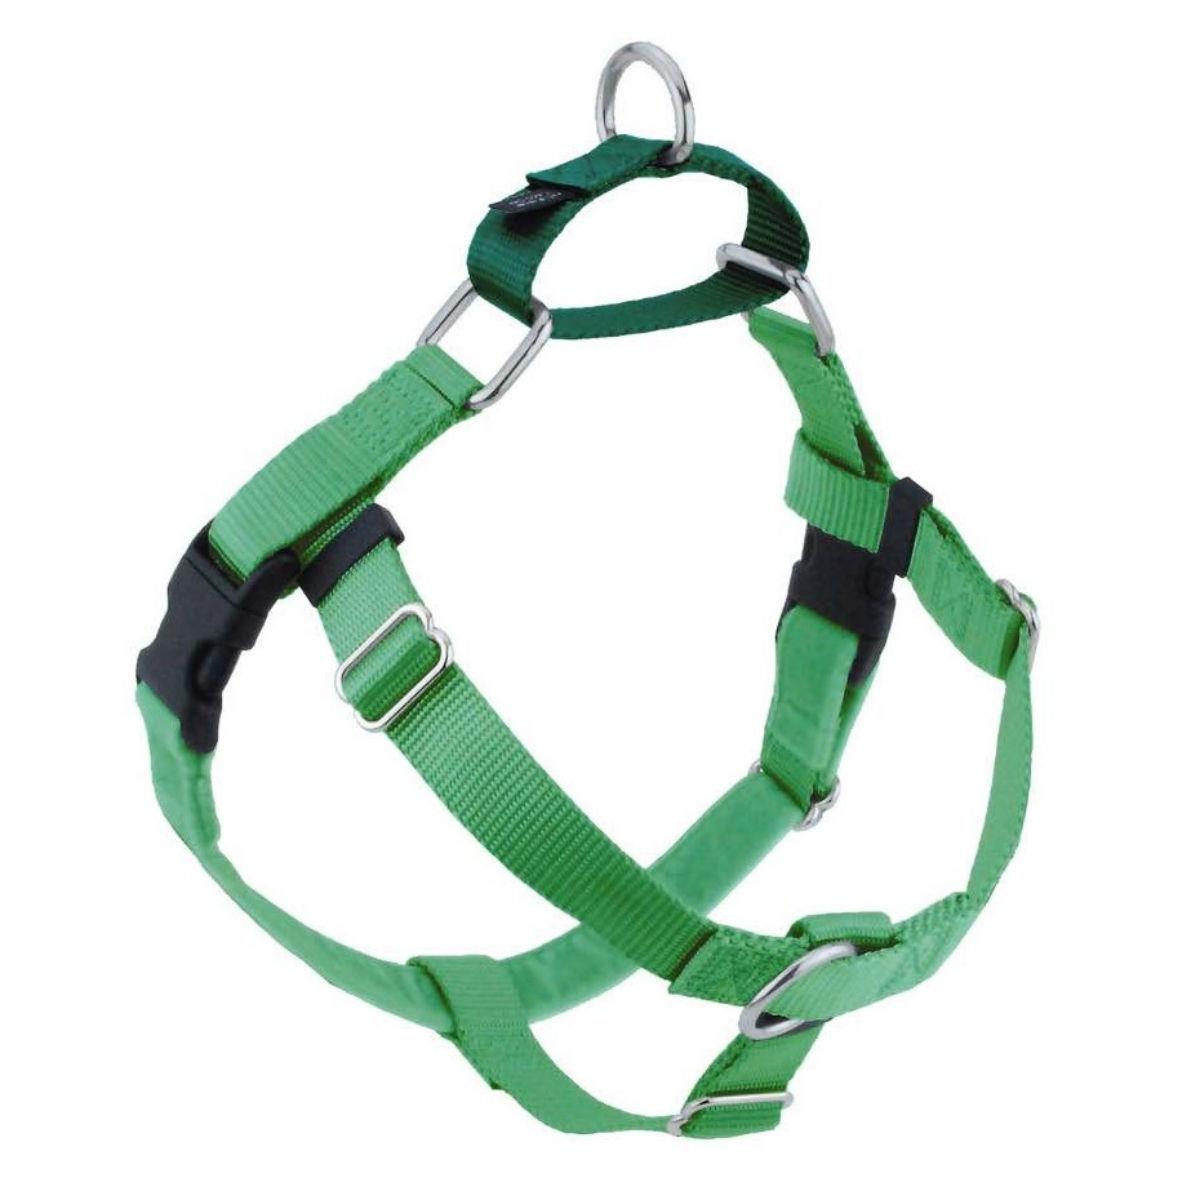 2 Hounds Design No-Pull Dog Harness Deluxe Training Package - Neon Green